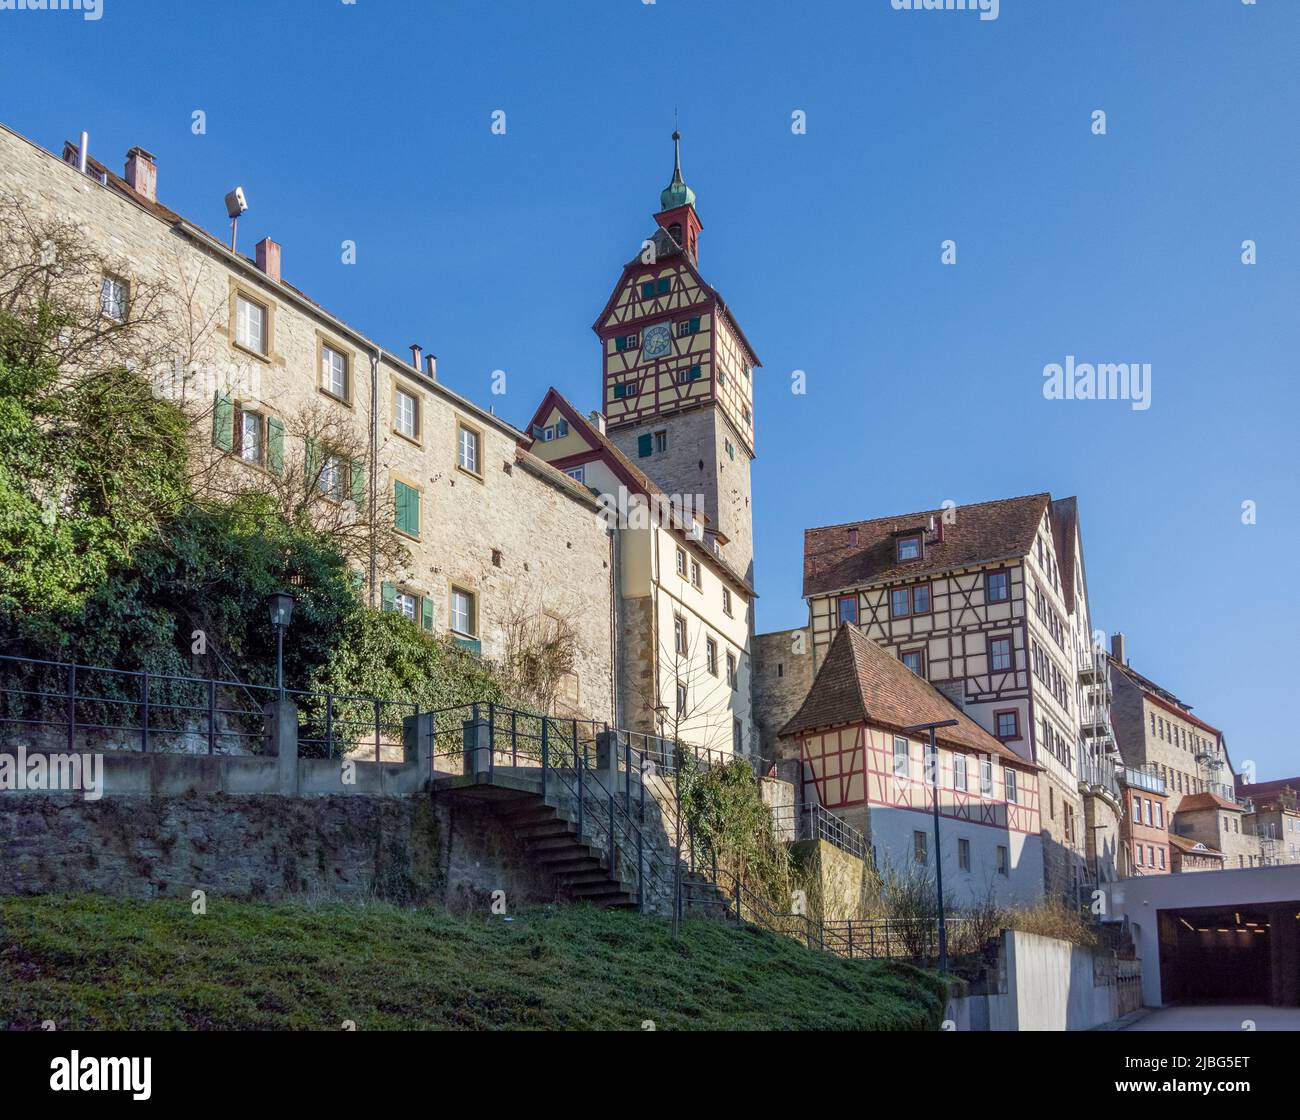 Impression of Schwaebisch Hall, a city in Southern Germany Stock Photo